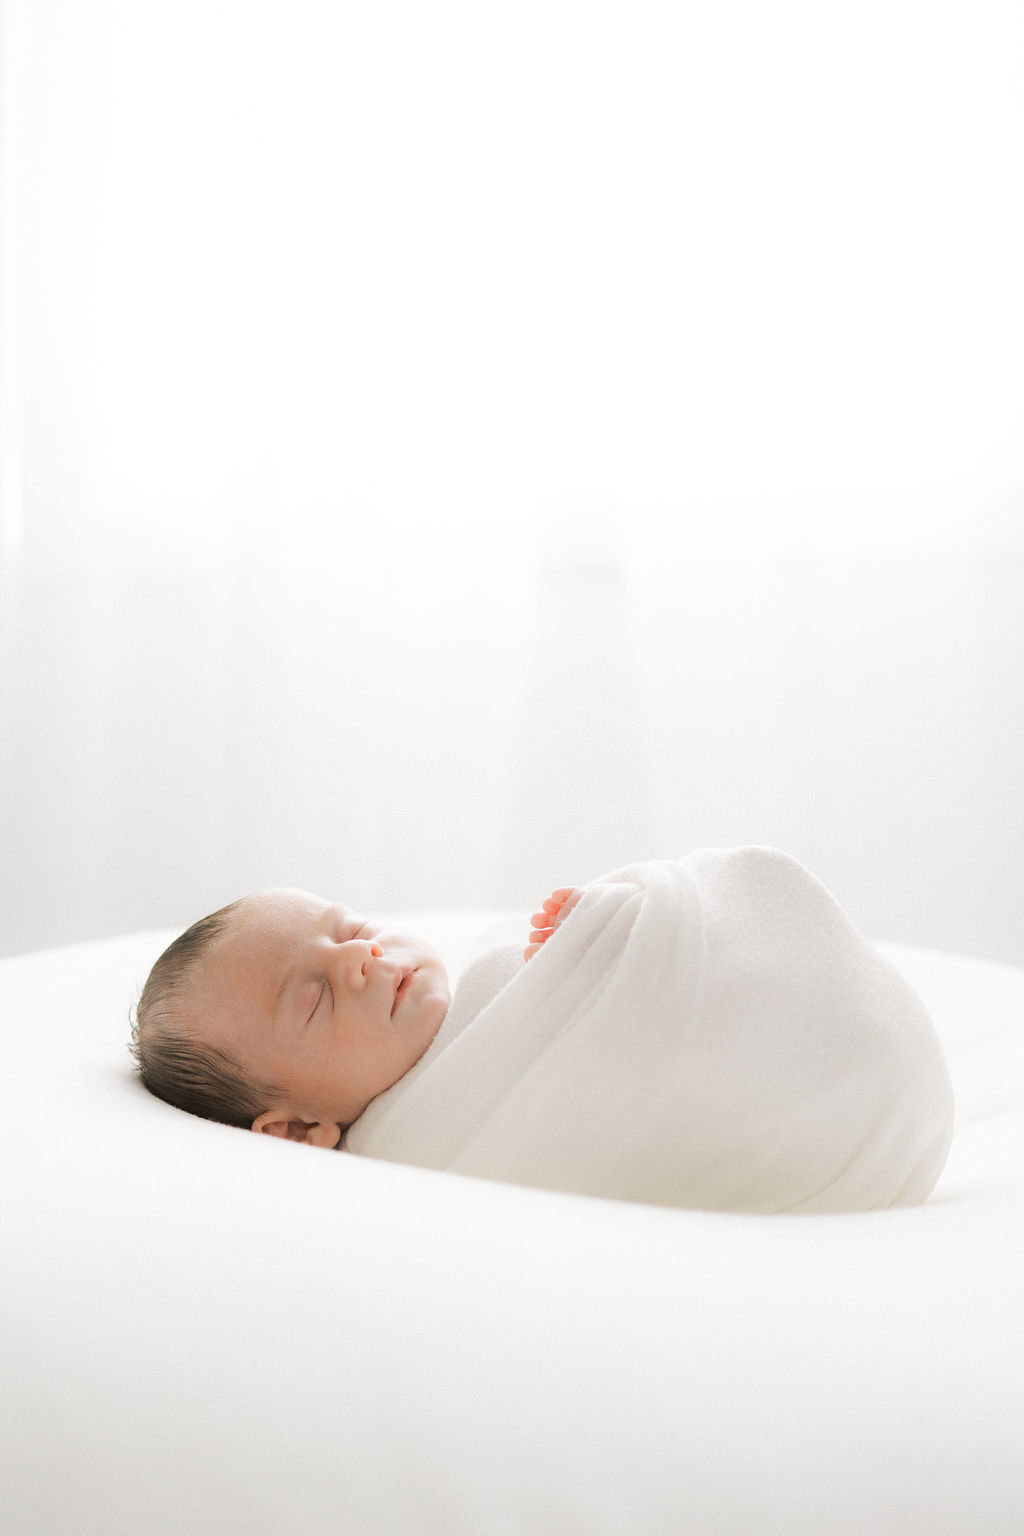 A newborn baby sleeps in a swaddle on a white bed in front of a window